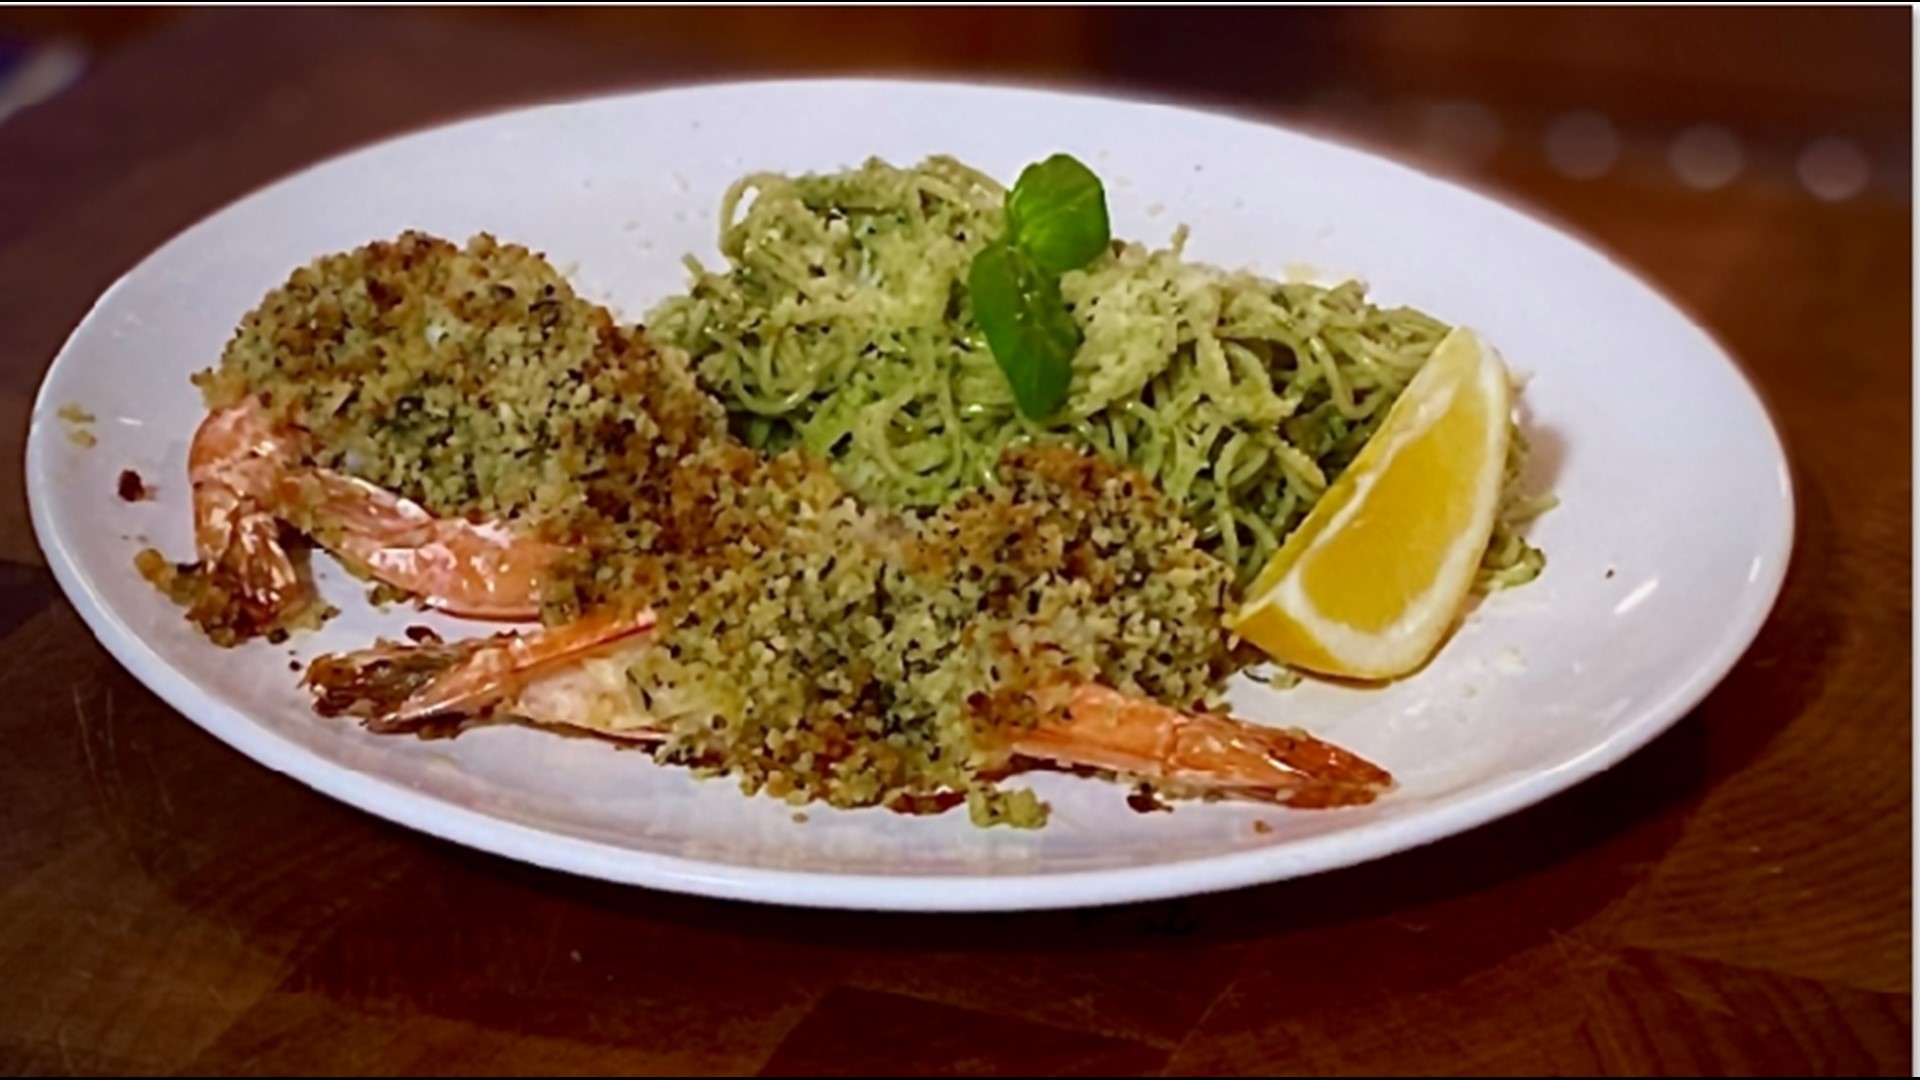 When I worked at Guilio's in Pacific Beach one of the top dishes was Scampi Oreganata.